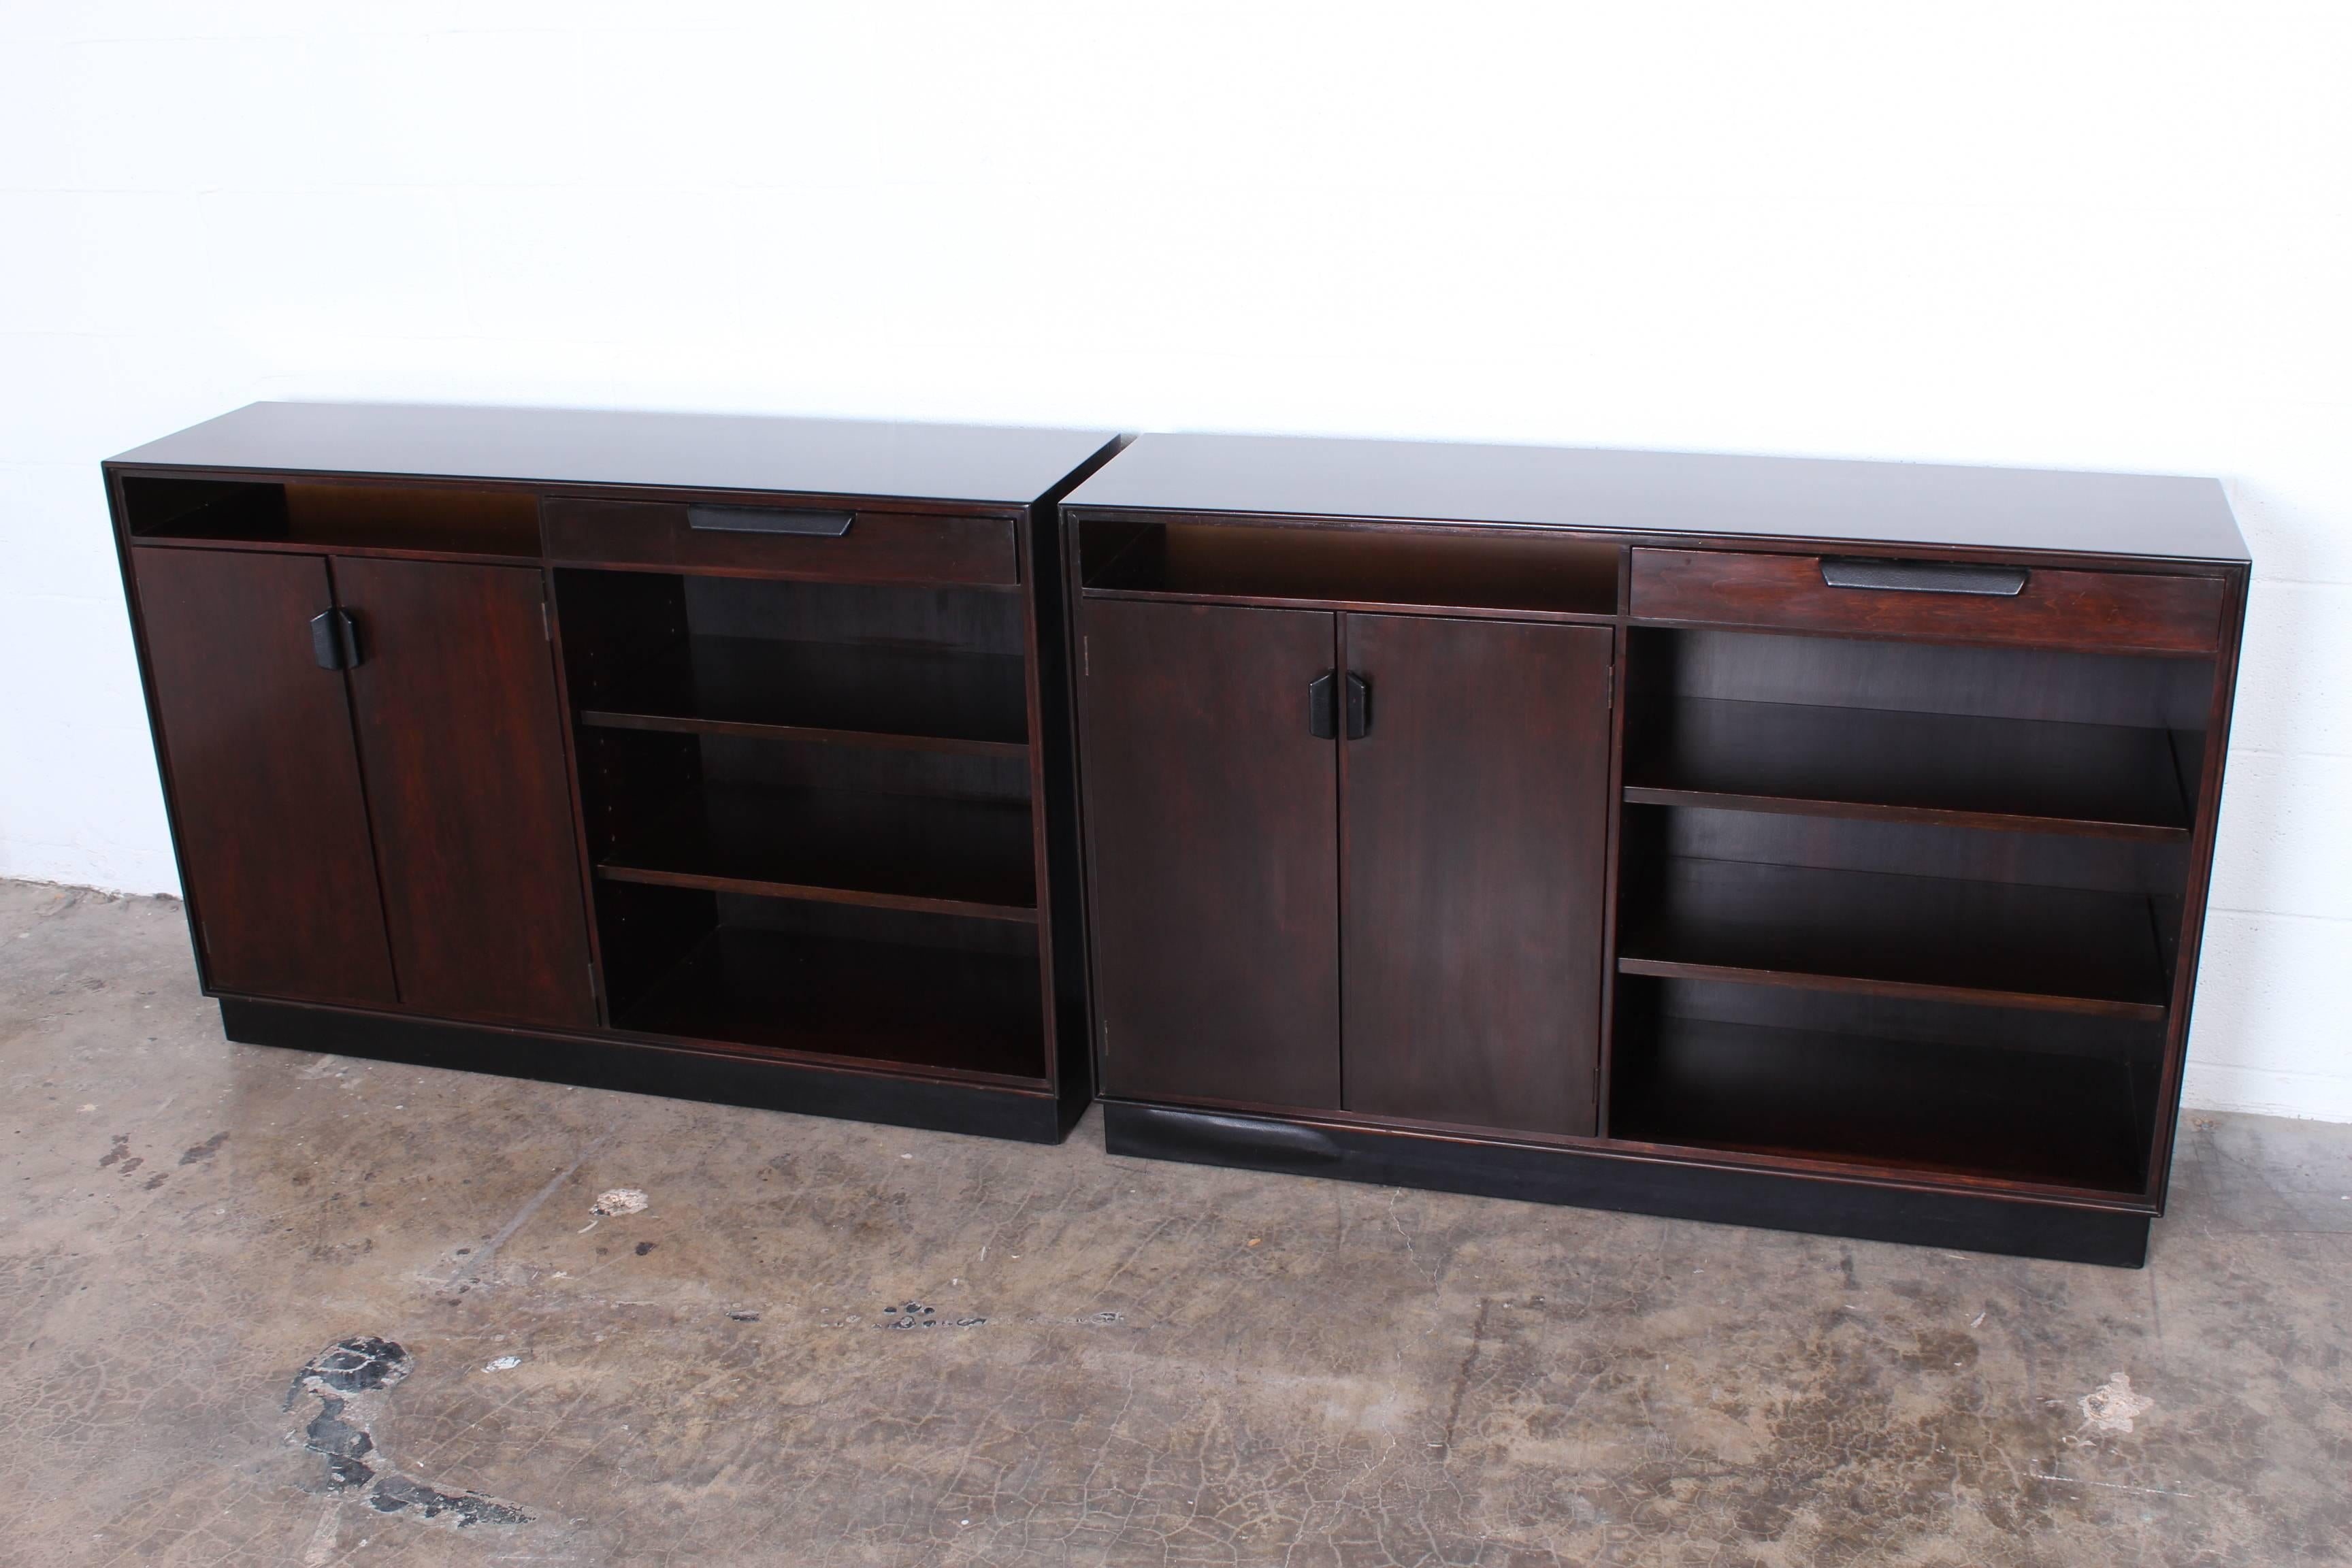 Pair of Bookcases by Edward Wormley for Dunbar 1